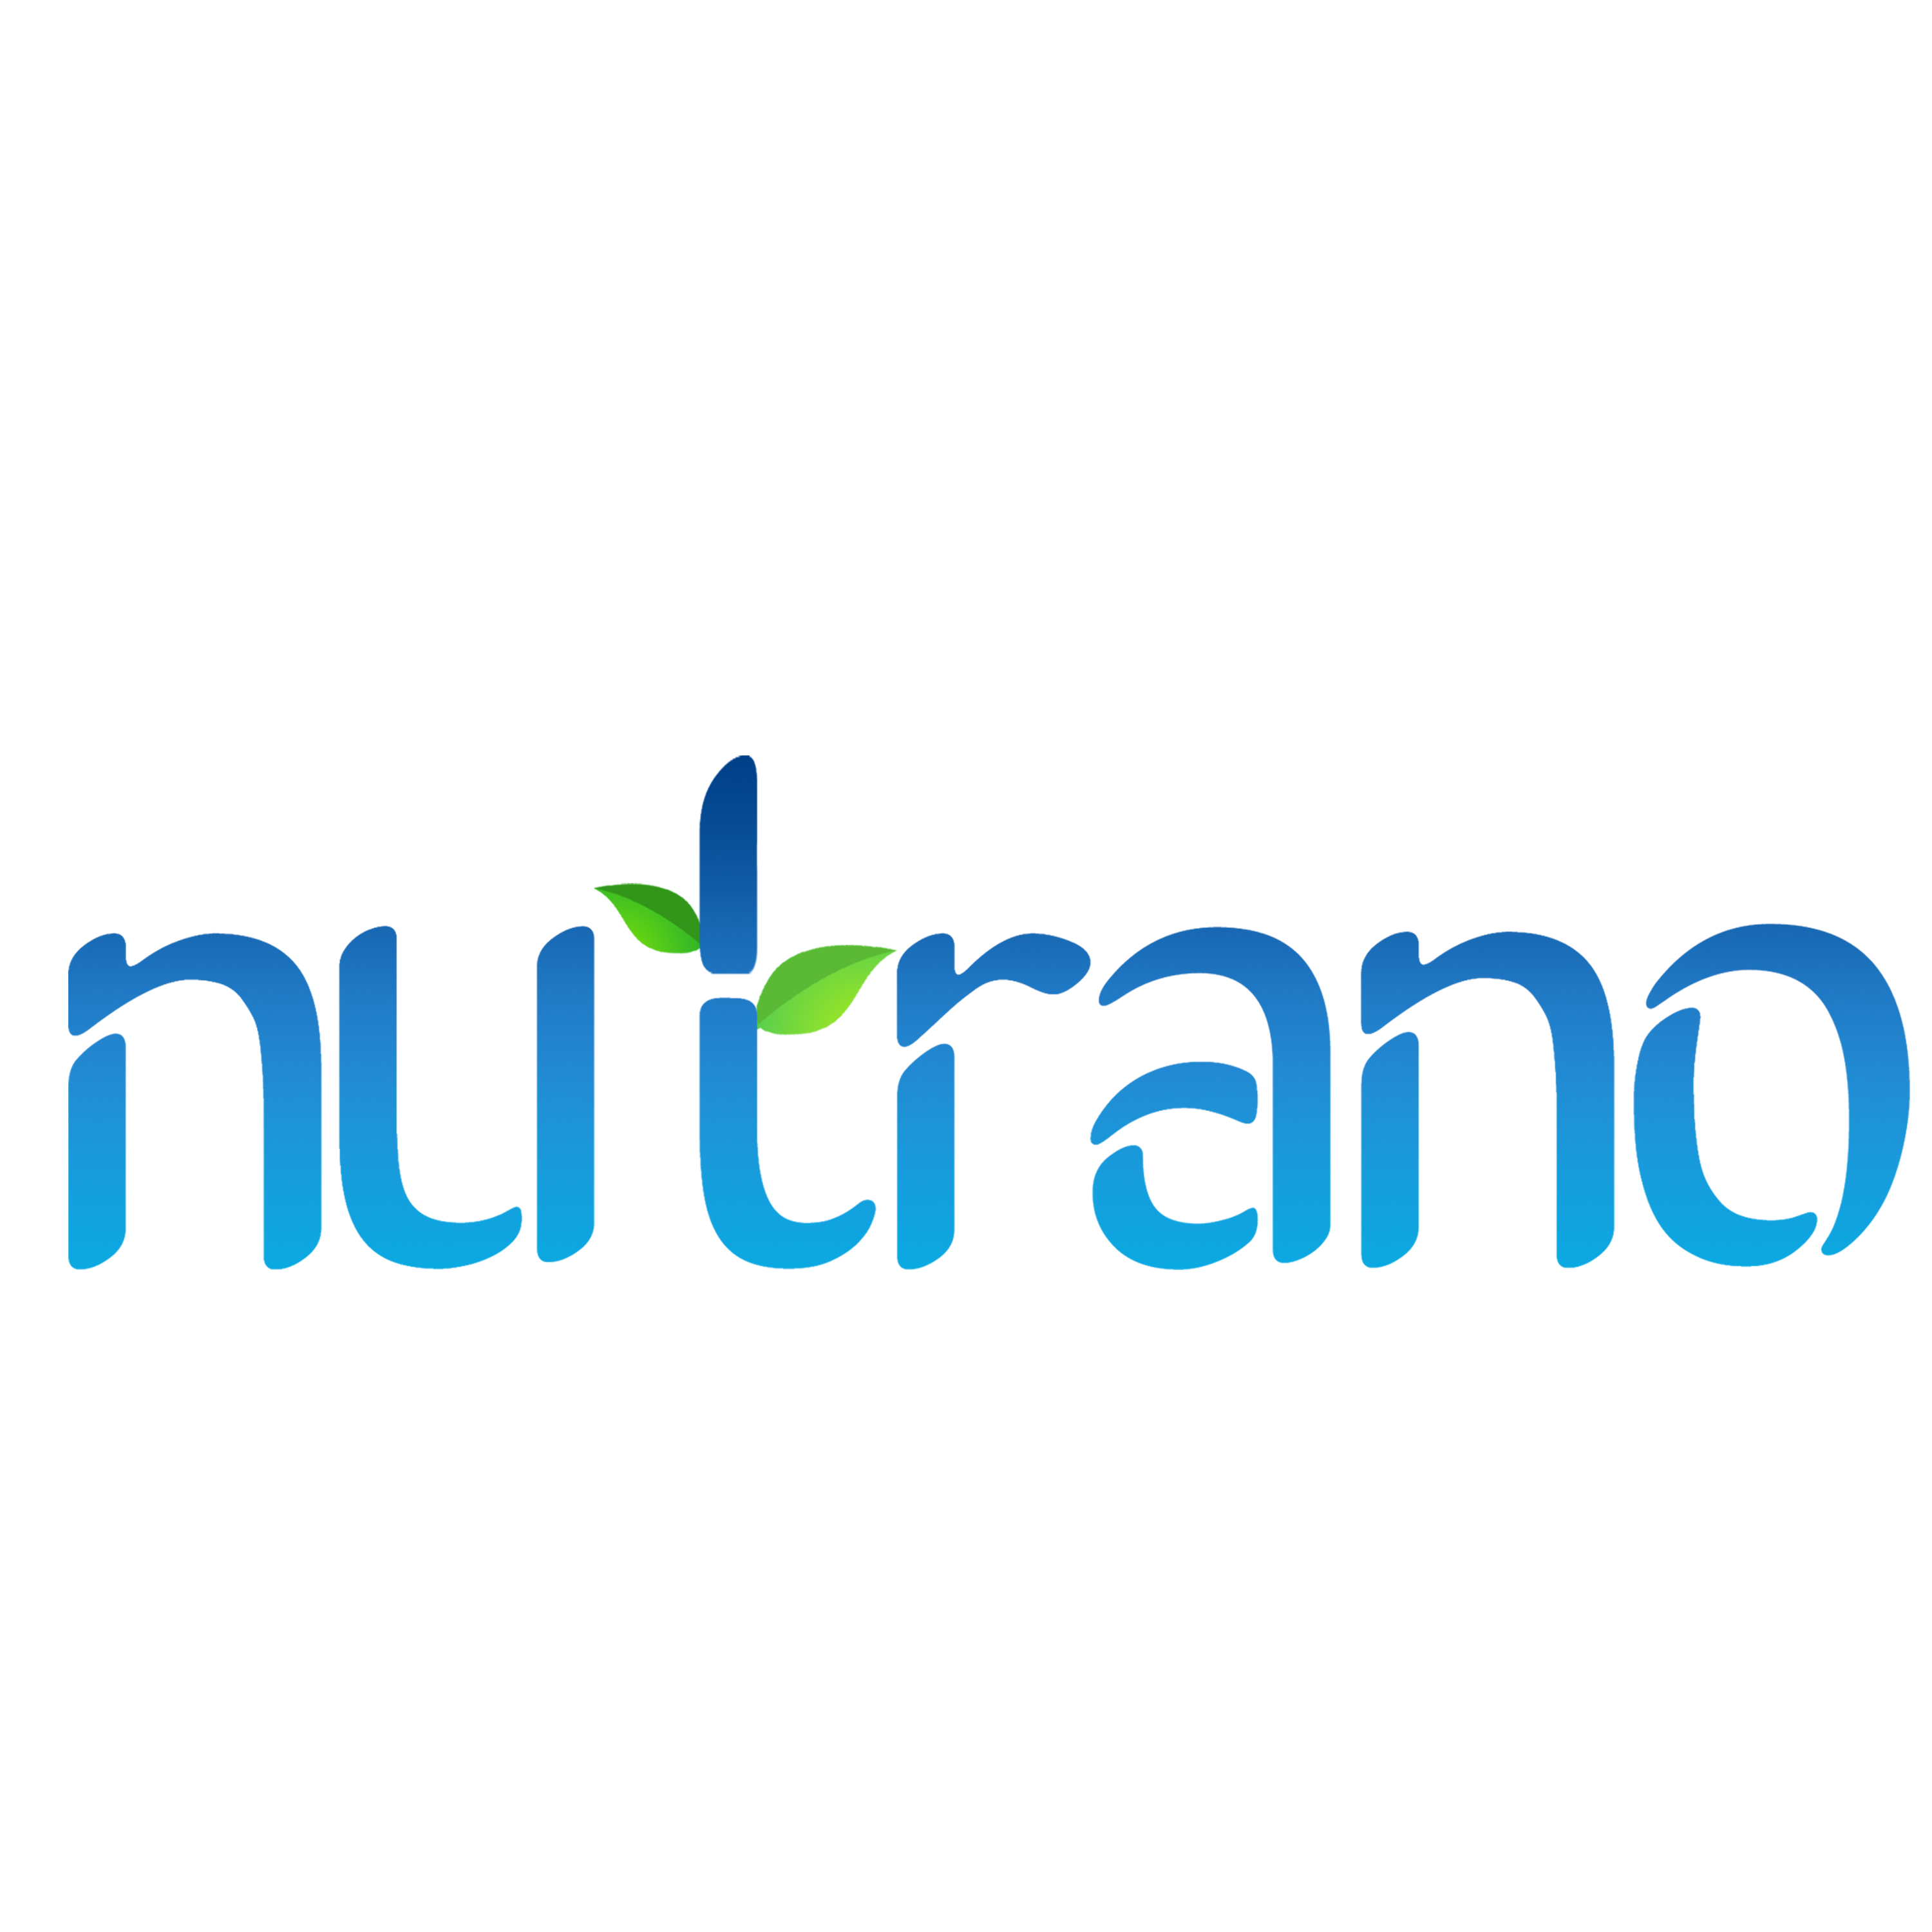 Nutrano Foods LLP